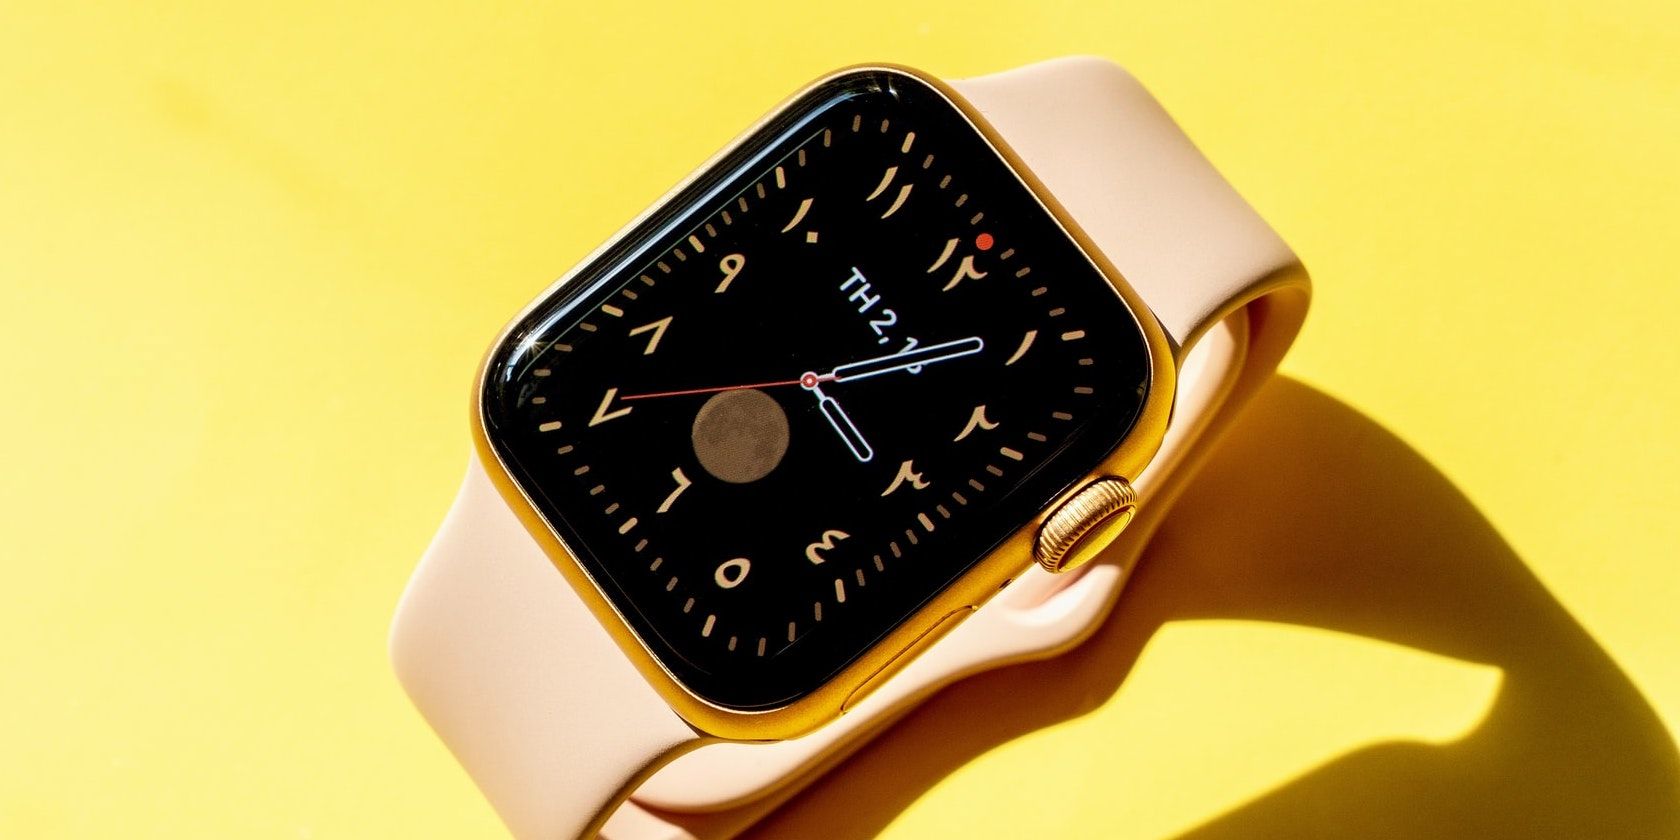 Apple watch on a yellow background showing the watch face